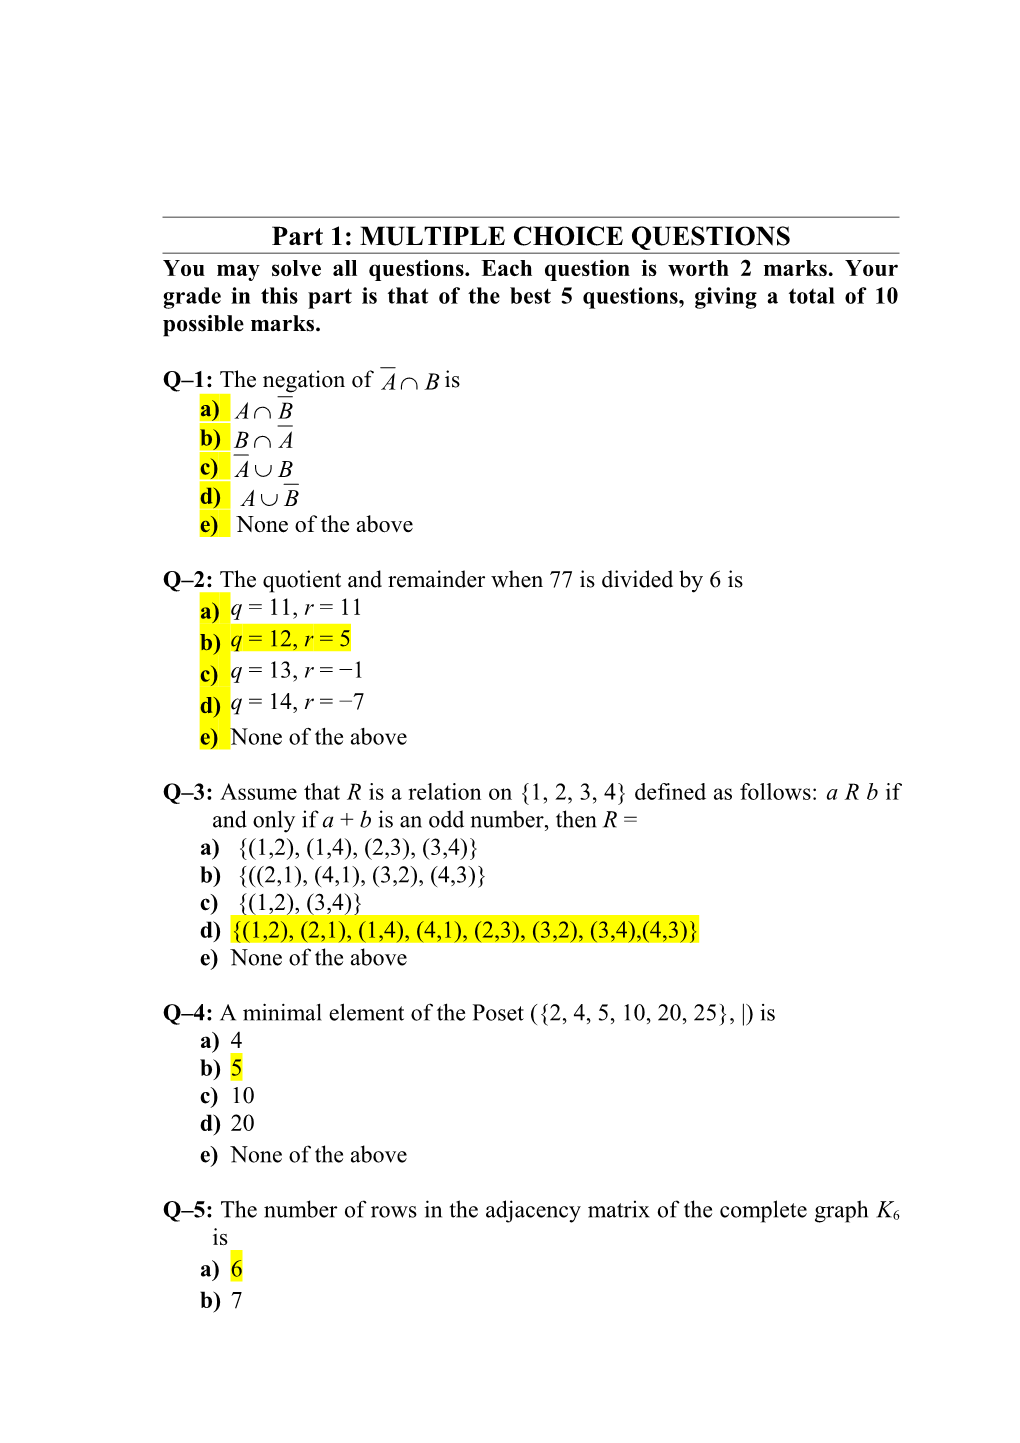 Declaration of No Repetition of Previous Exam Questions